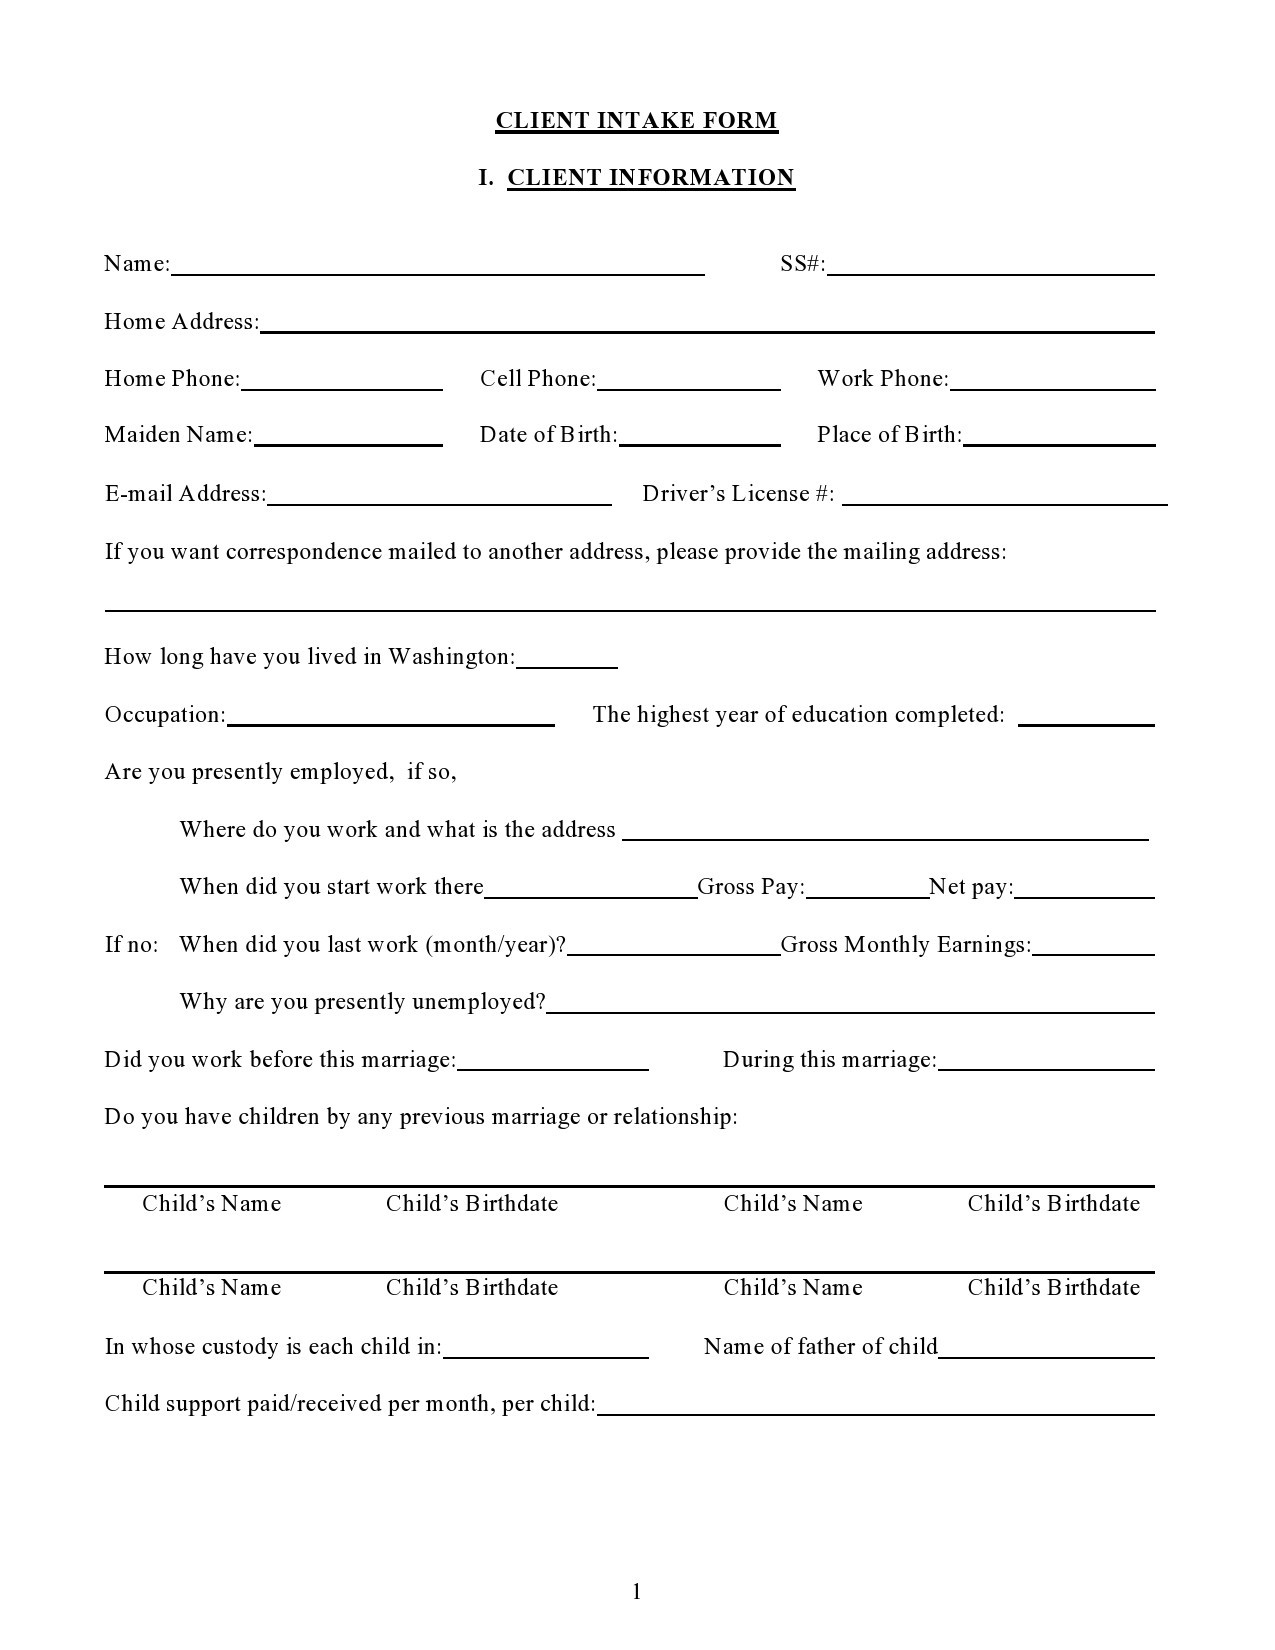 Free client intake form 33